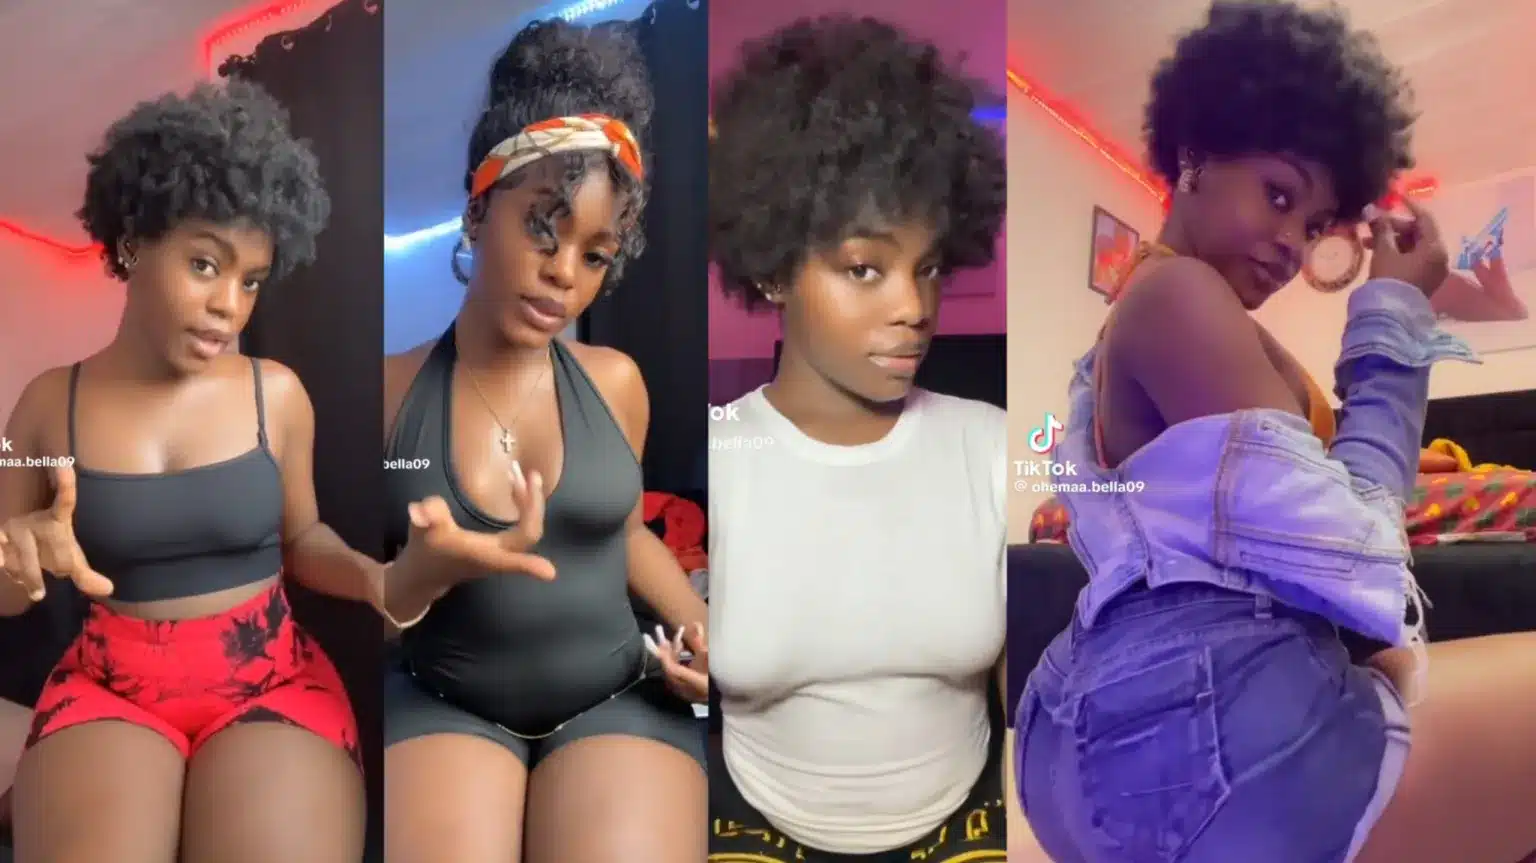 ”She fine pass Maali”; More videos of the slayqueen snatching Shatta Wale from Maali pops up – WATCH